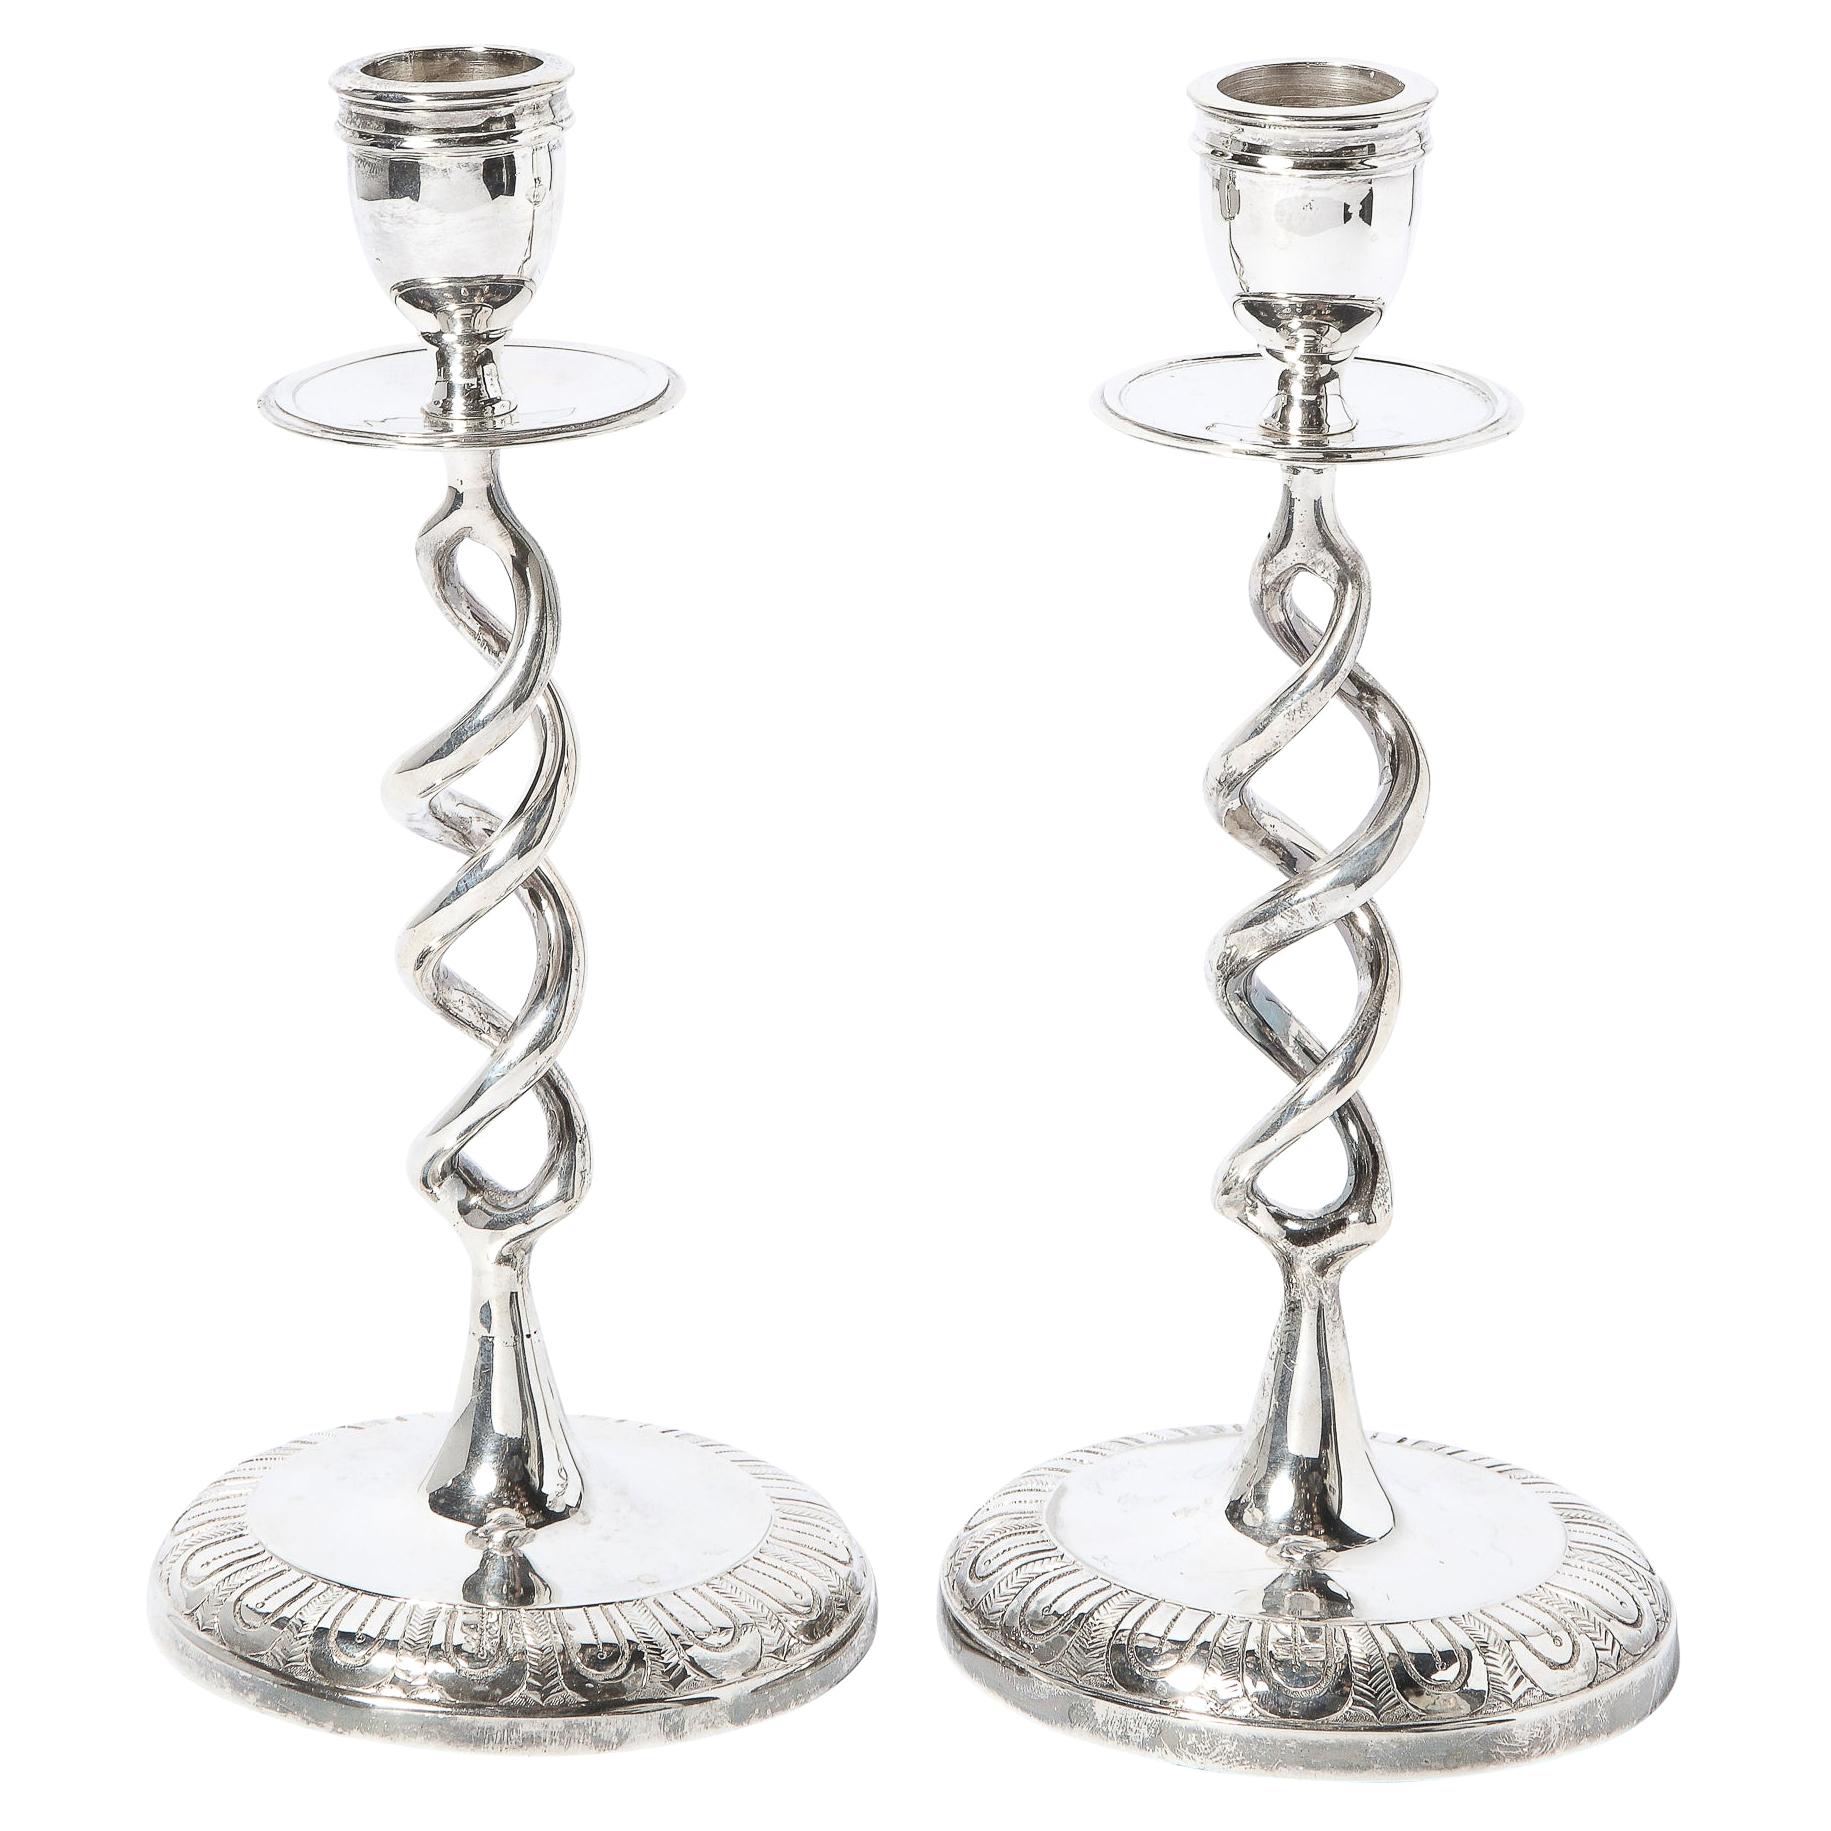 Pair of British Mid-Century Modern Nickel Helix Form Candle Holders For Sale